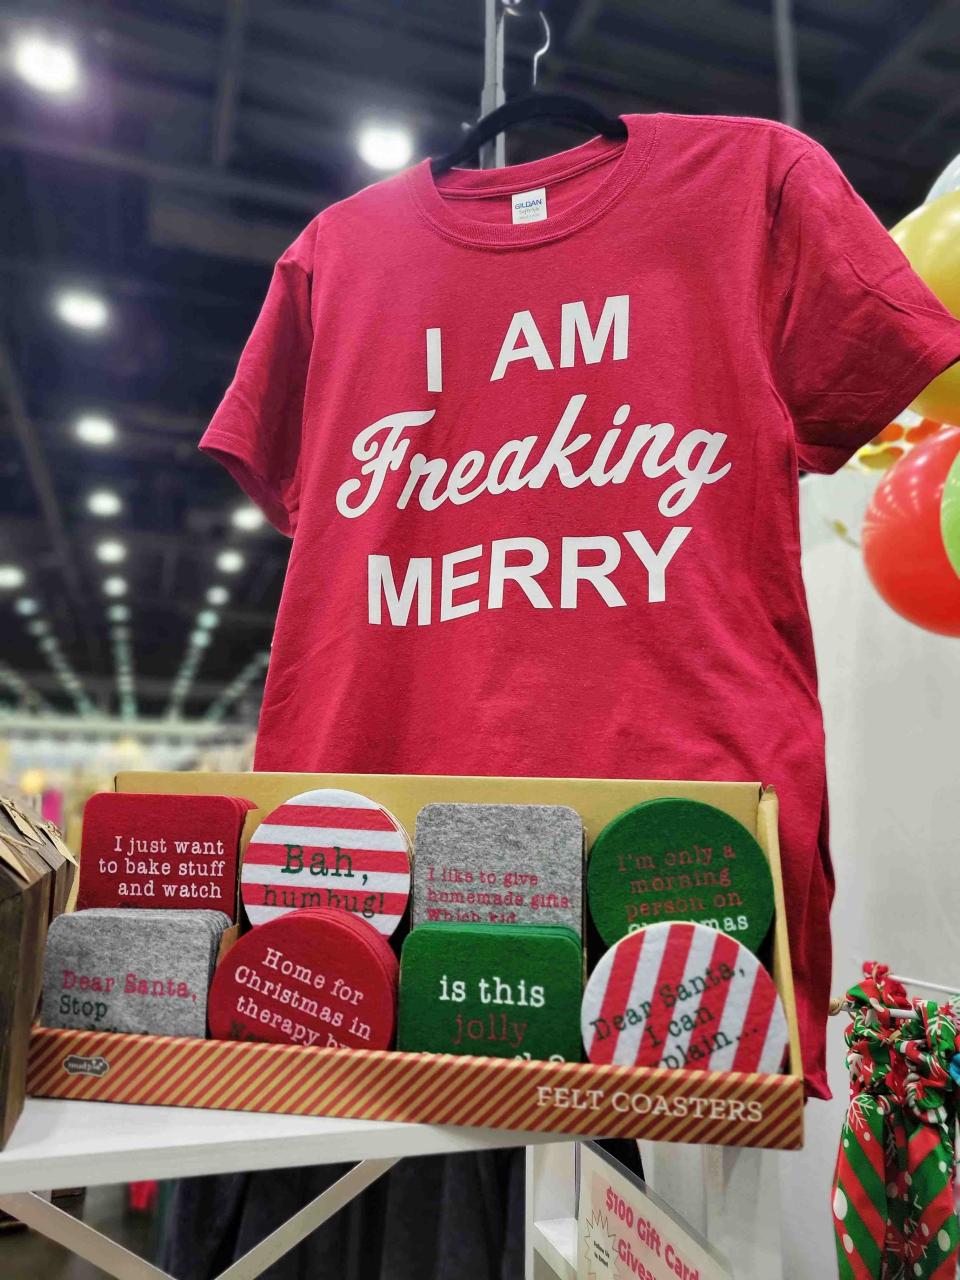 You never know what you will find at the Greater Cincinnati Holiday Market, taking place Nov. 9-12 at the Duke Energy Convention Center.